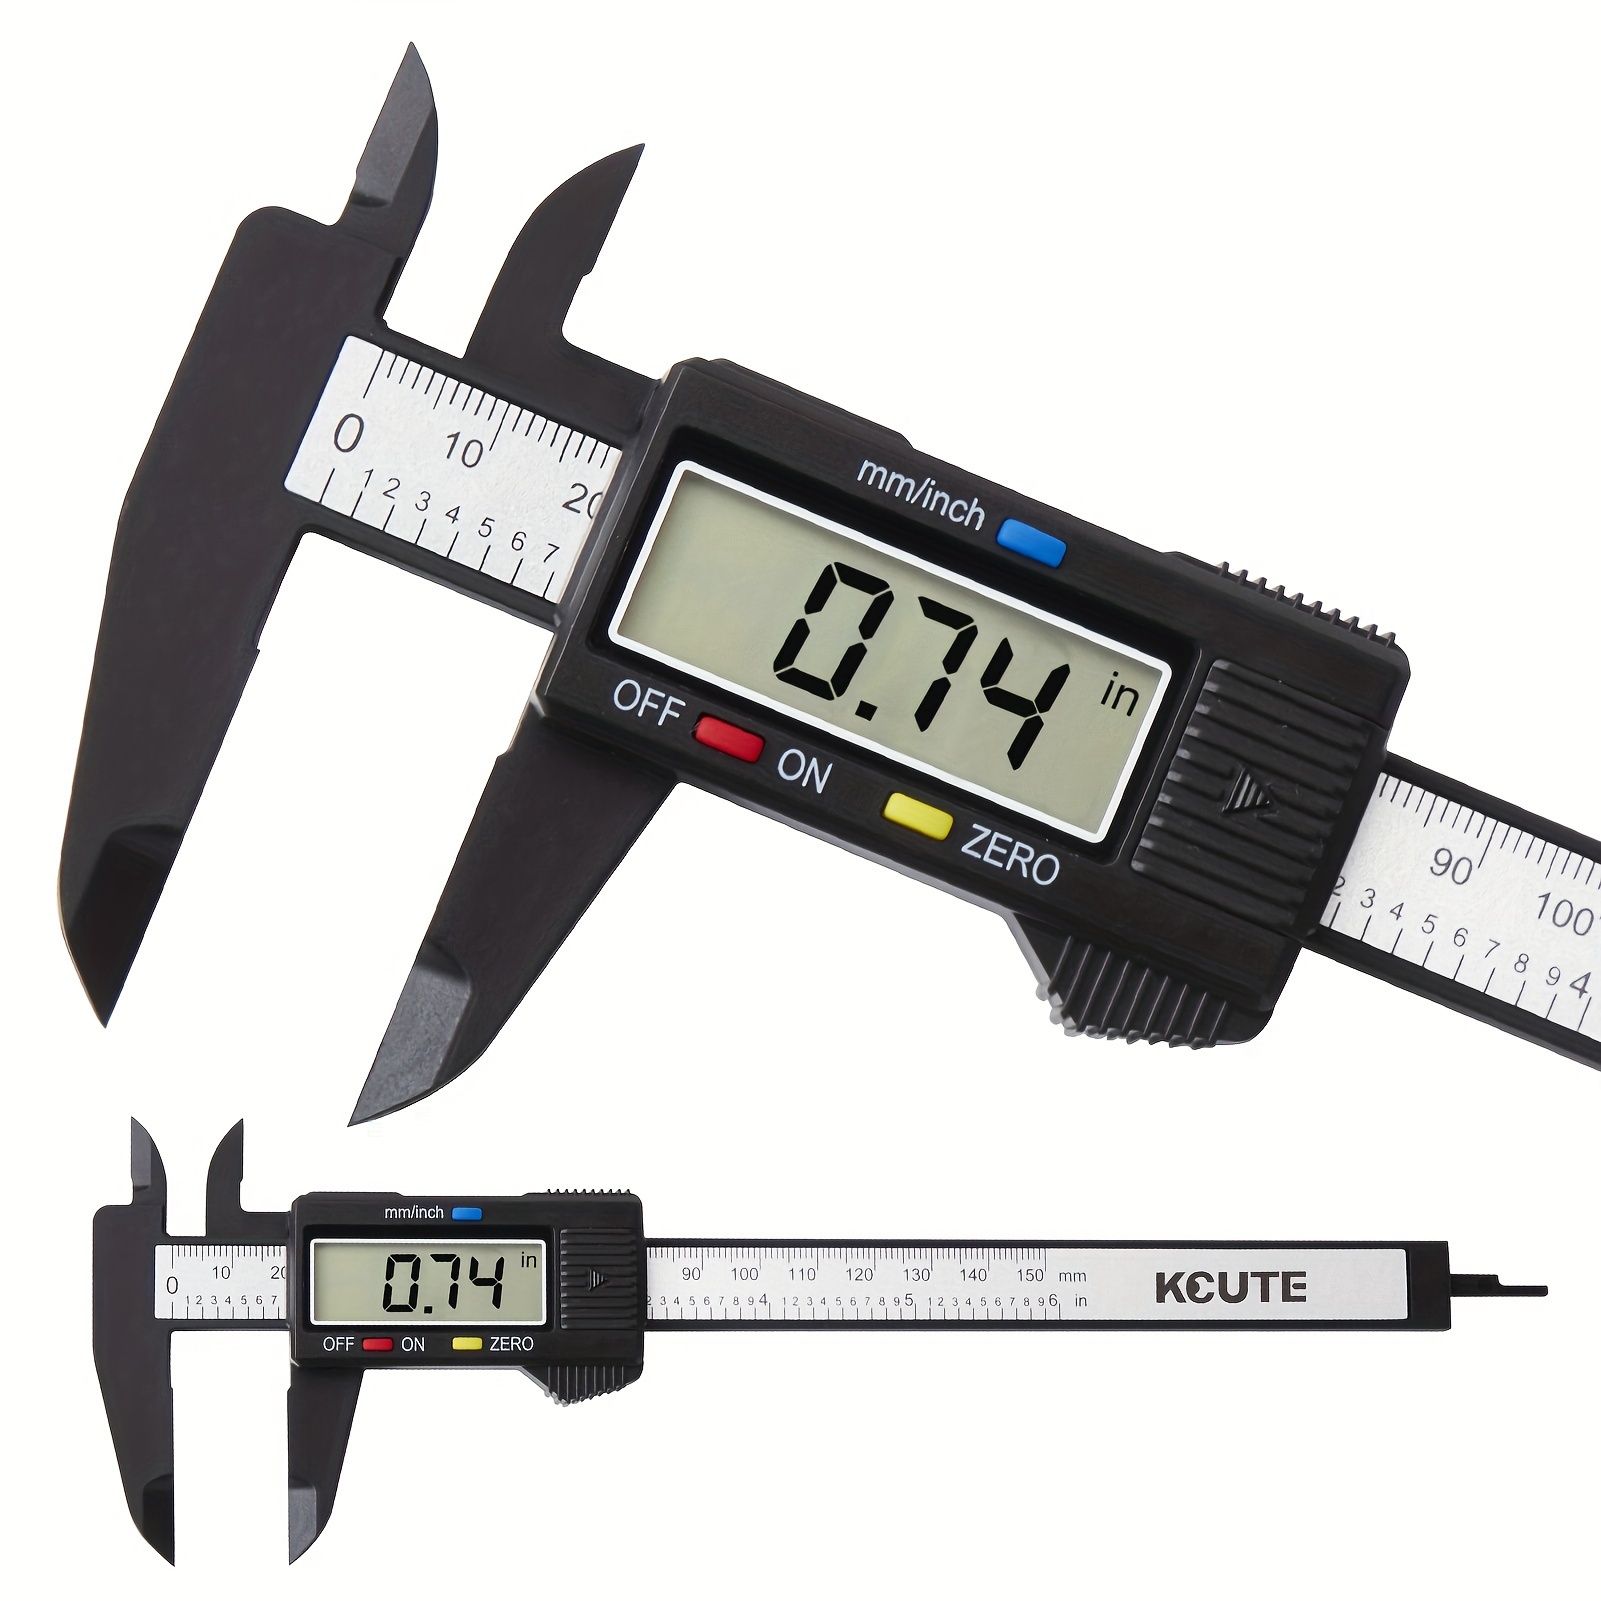 Digital Caliper, Adoric 0-6 Calipers Measuring Tool - Electronic  Micrometer Caliper with Large LCD Screen, Auto-Off Feature, Inch and  Millimeter